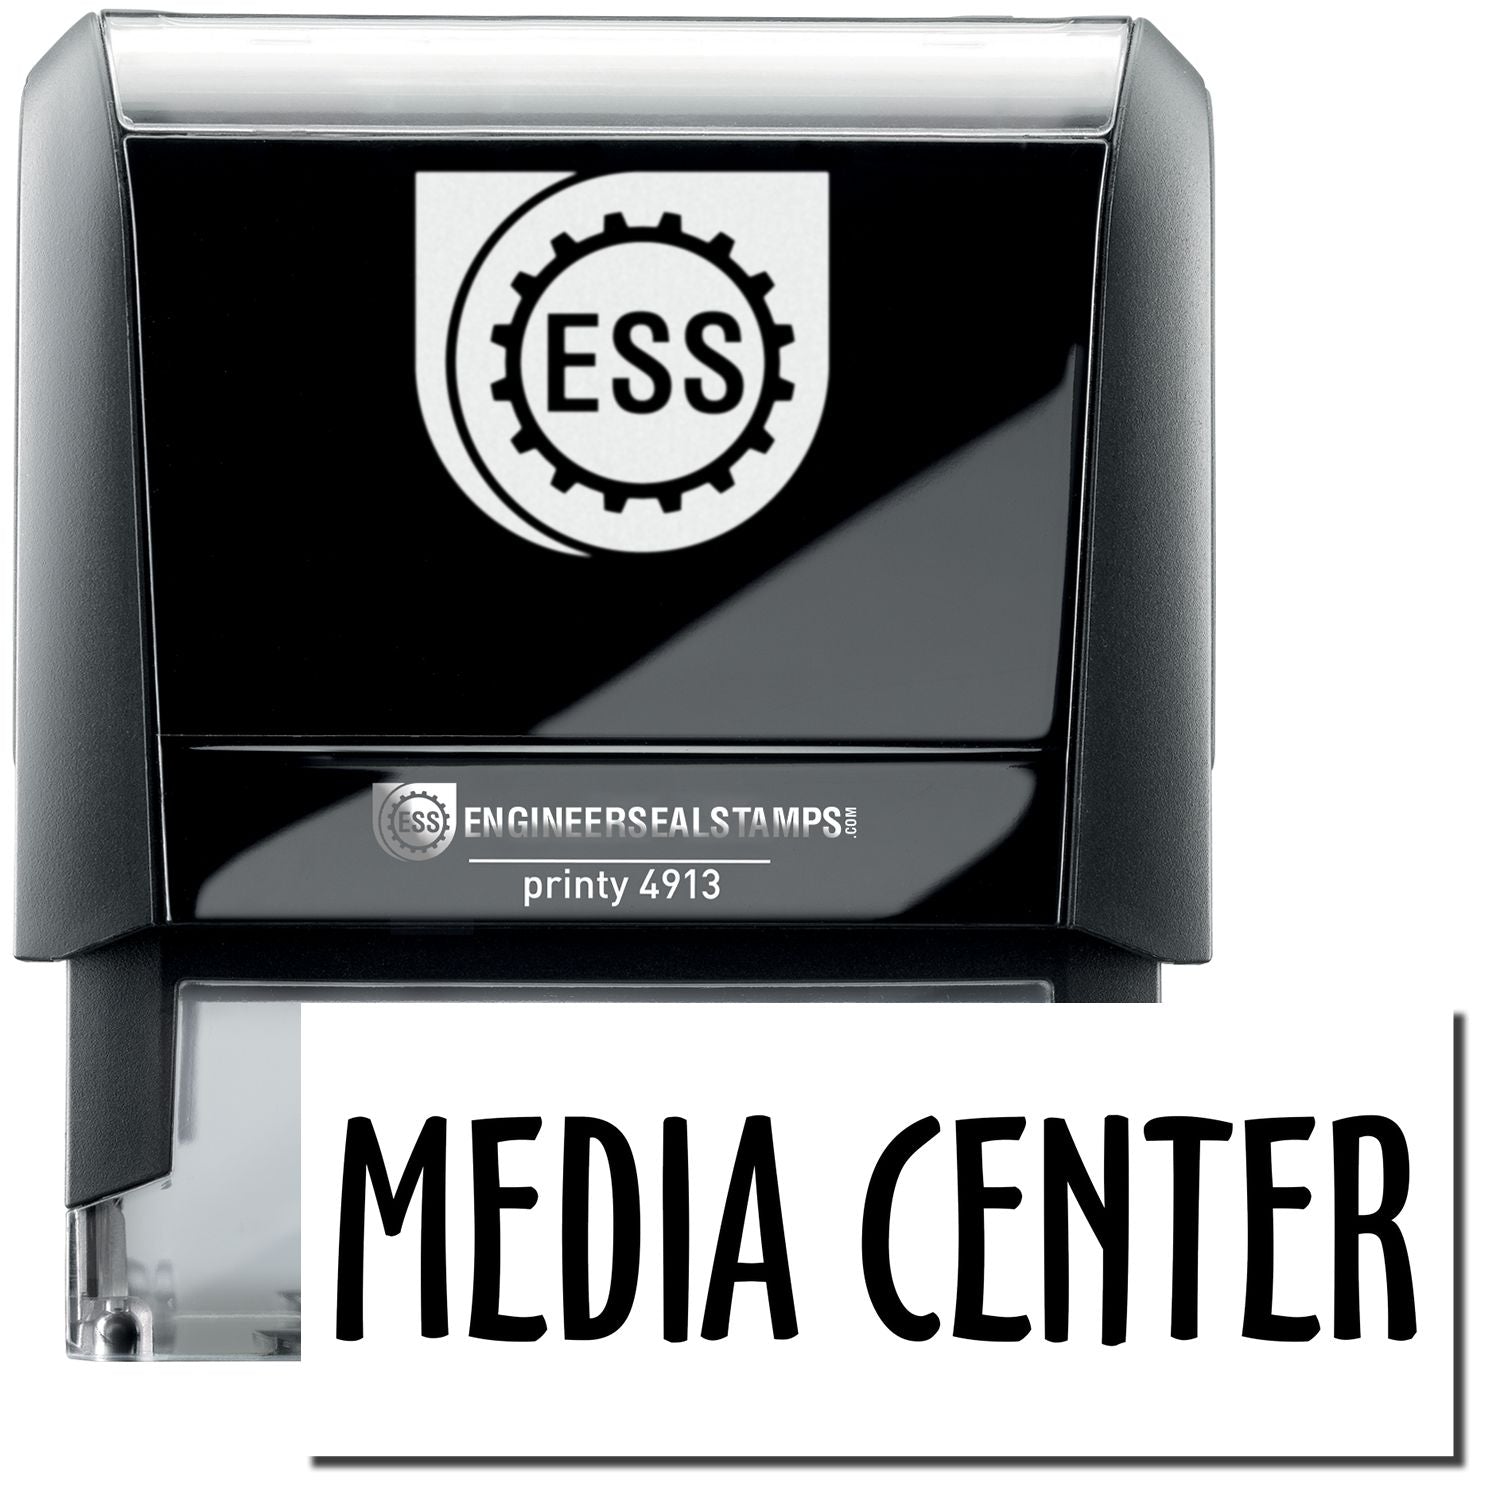 A self-inking stamp with a stamped image showing how the text "MEDIA CENTER" in a large bold font is displayed by it.